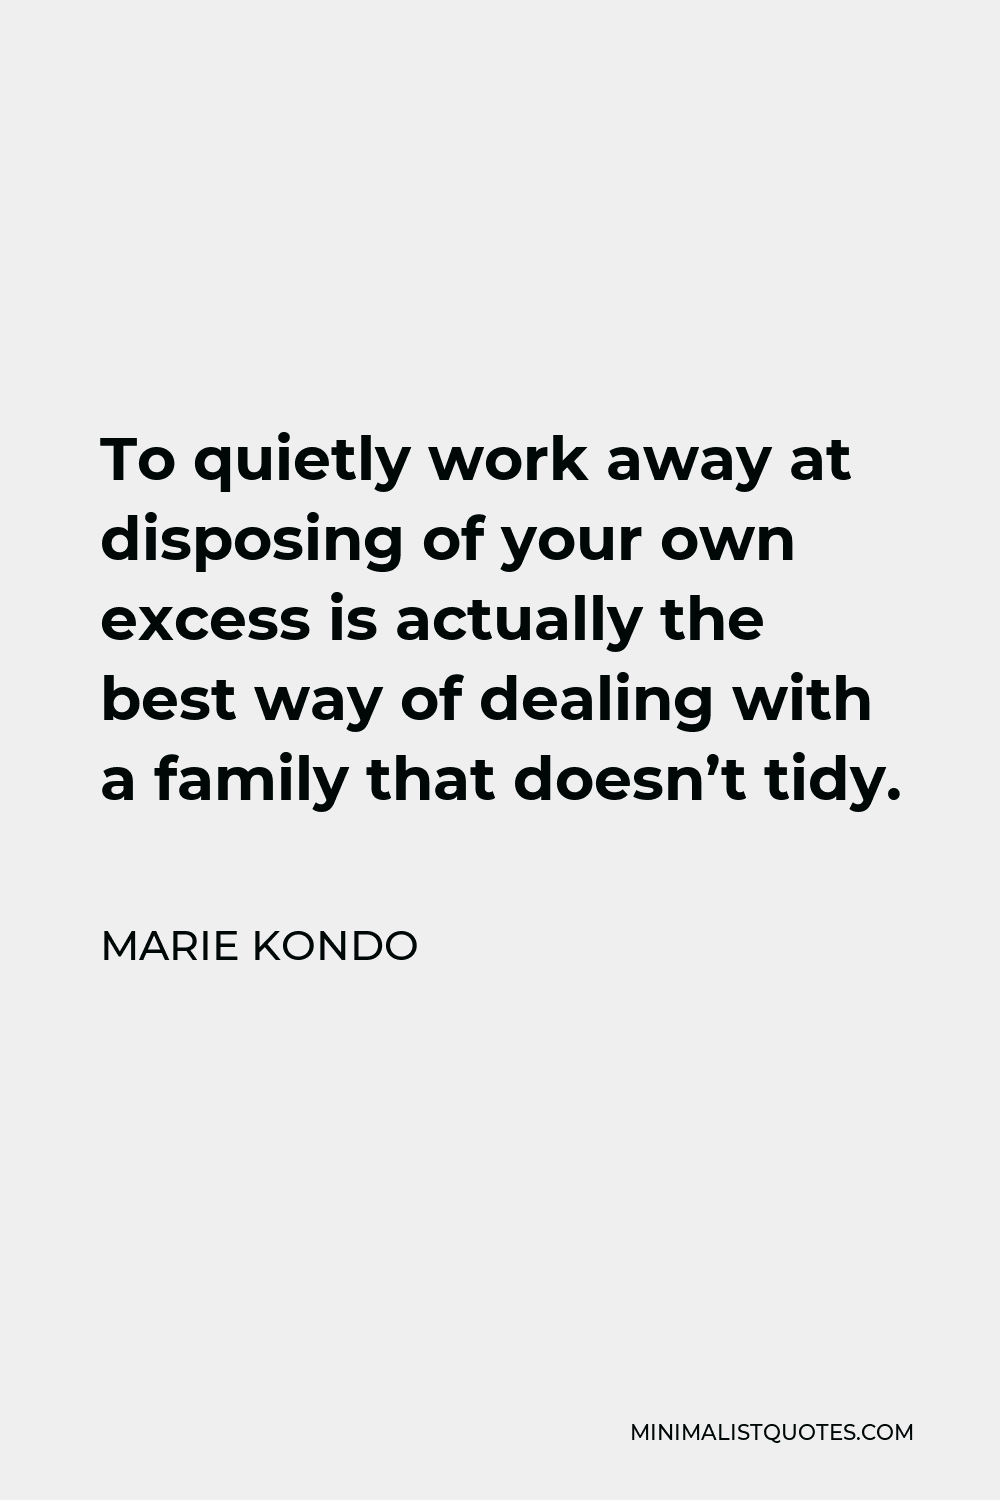 Marie Kondo Quote - To quietly work away at disposing of your own excess is actually the best way of dealing with a family that doesn’t tidy.